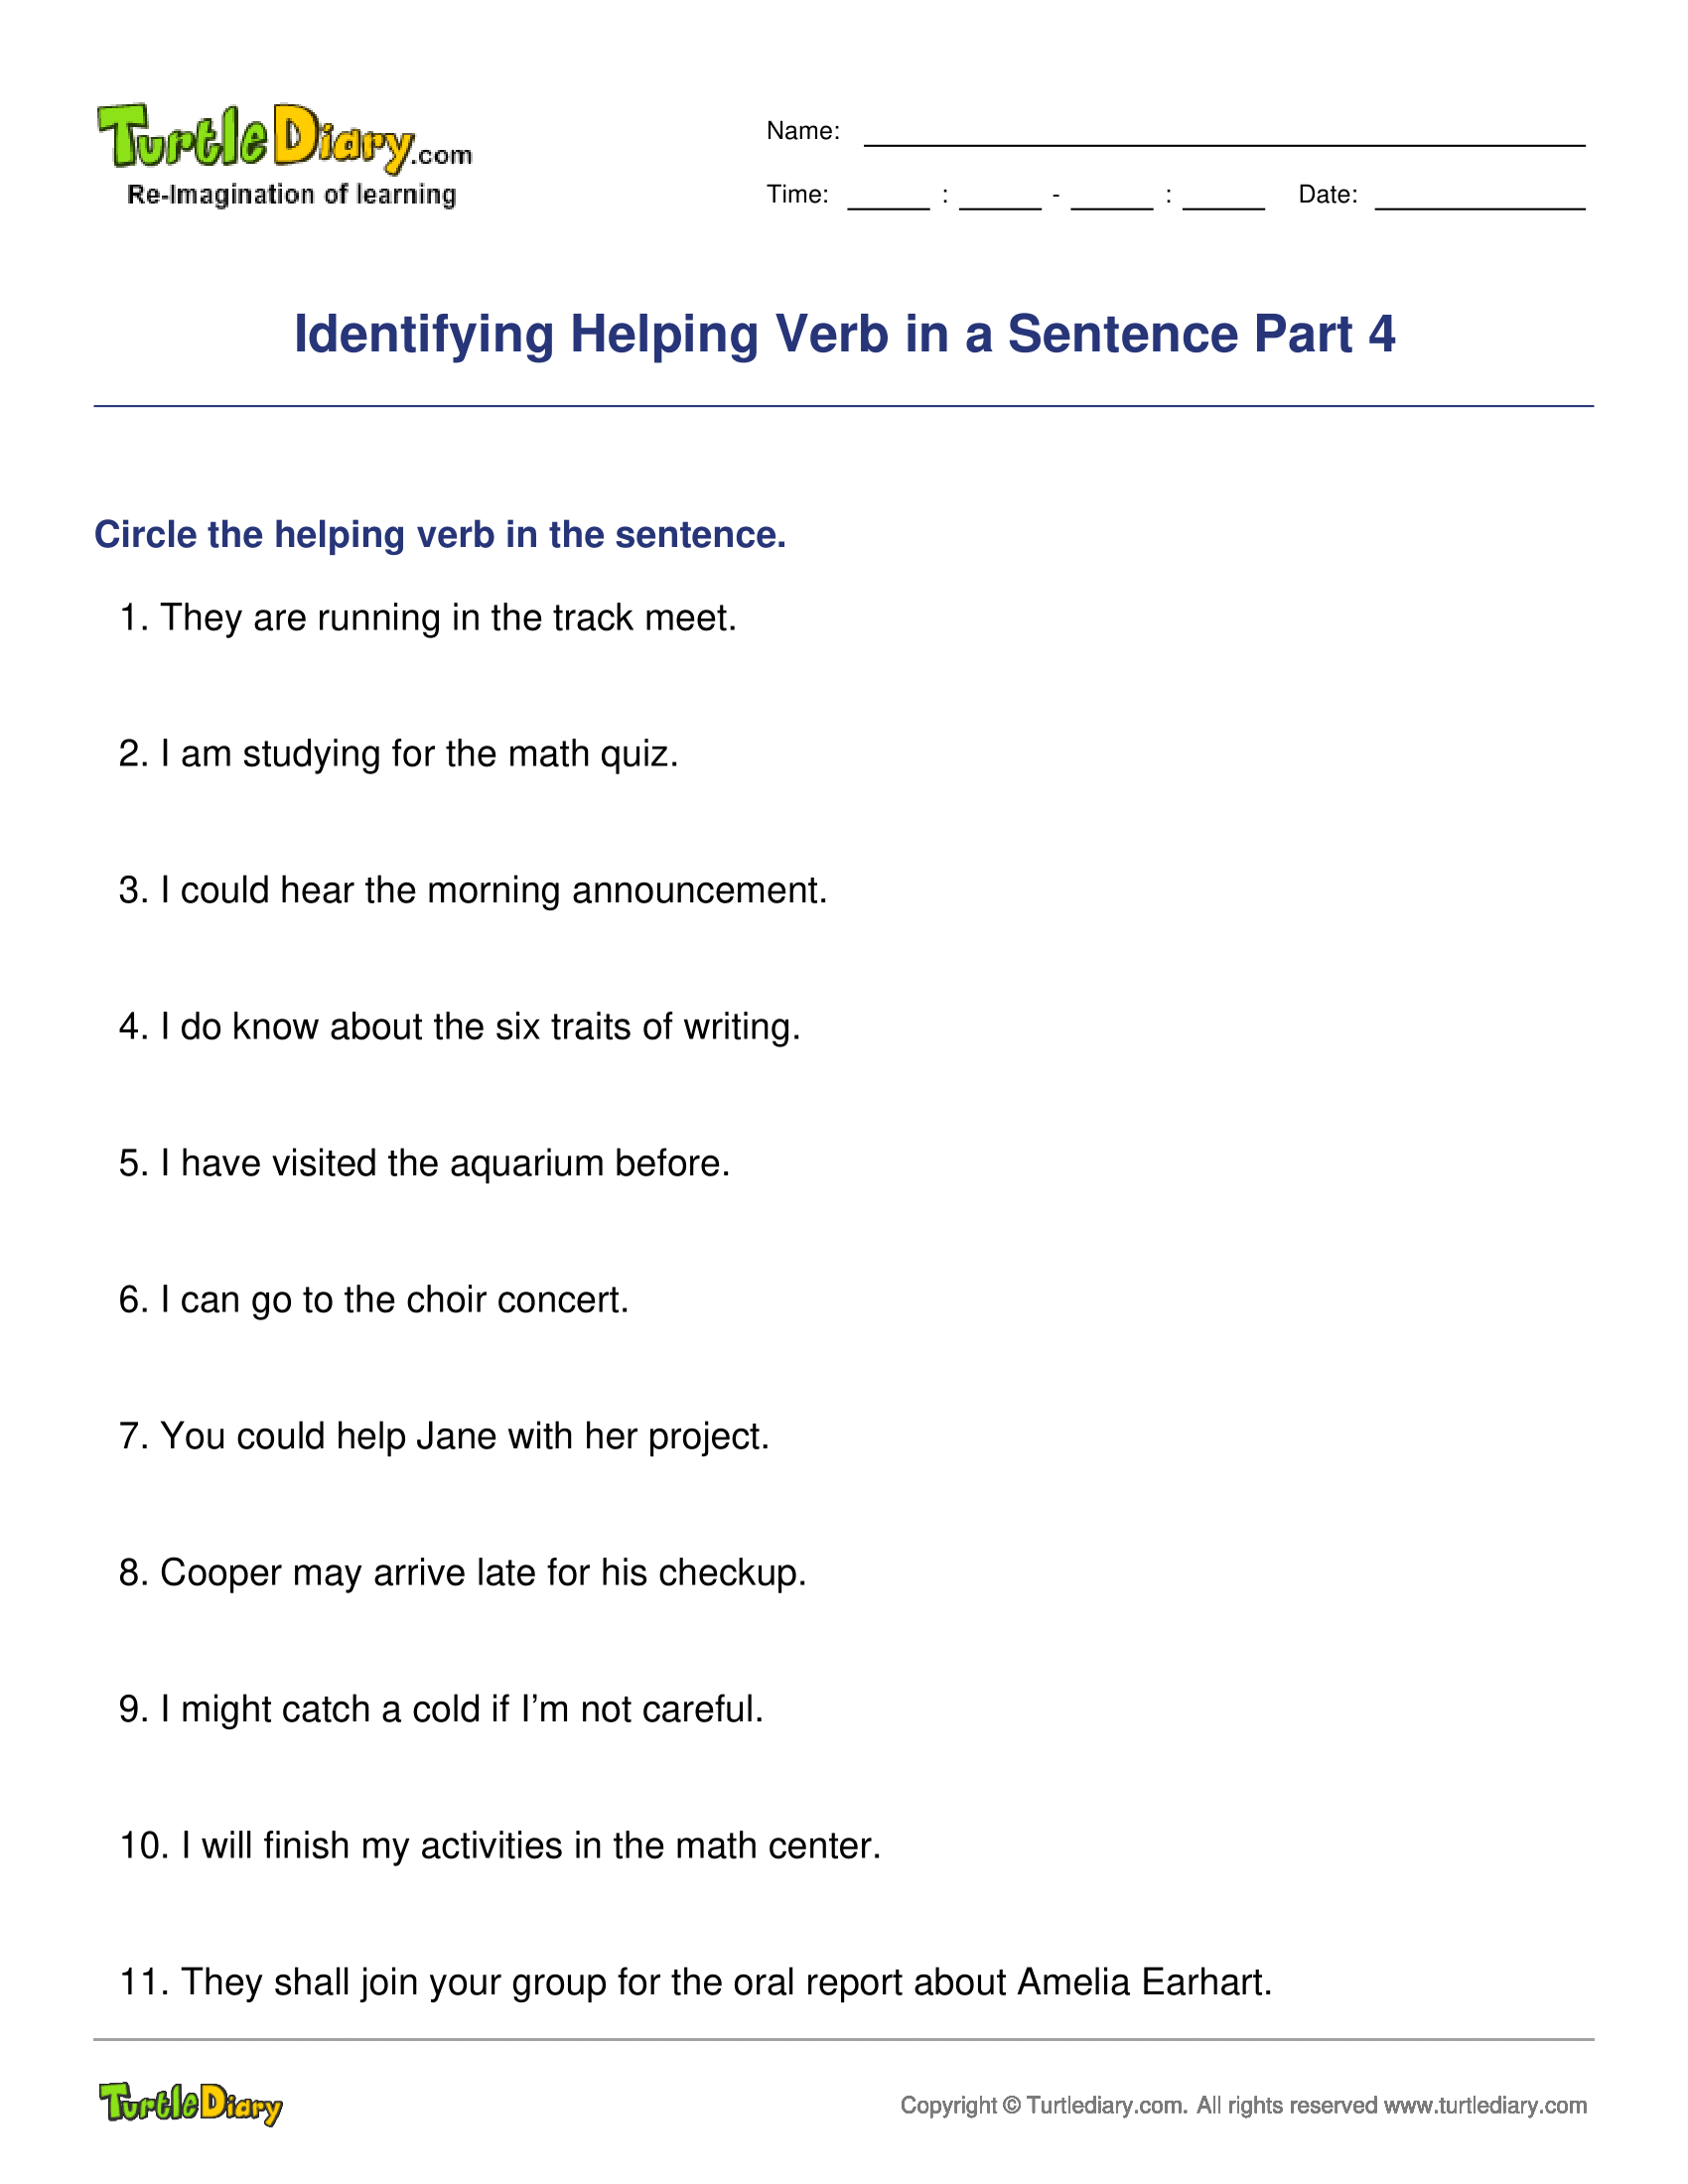 Identifying Helping Verb in a Sentence Part 4